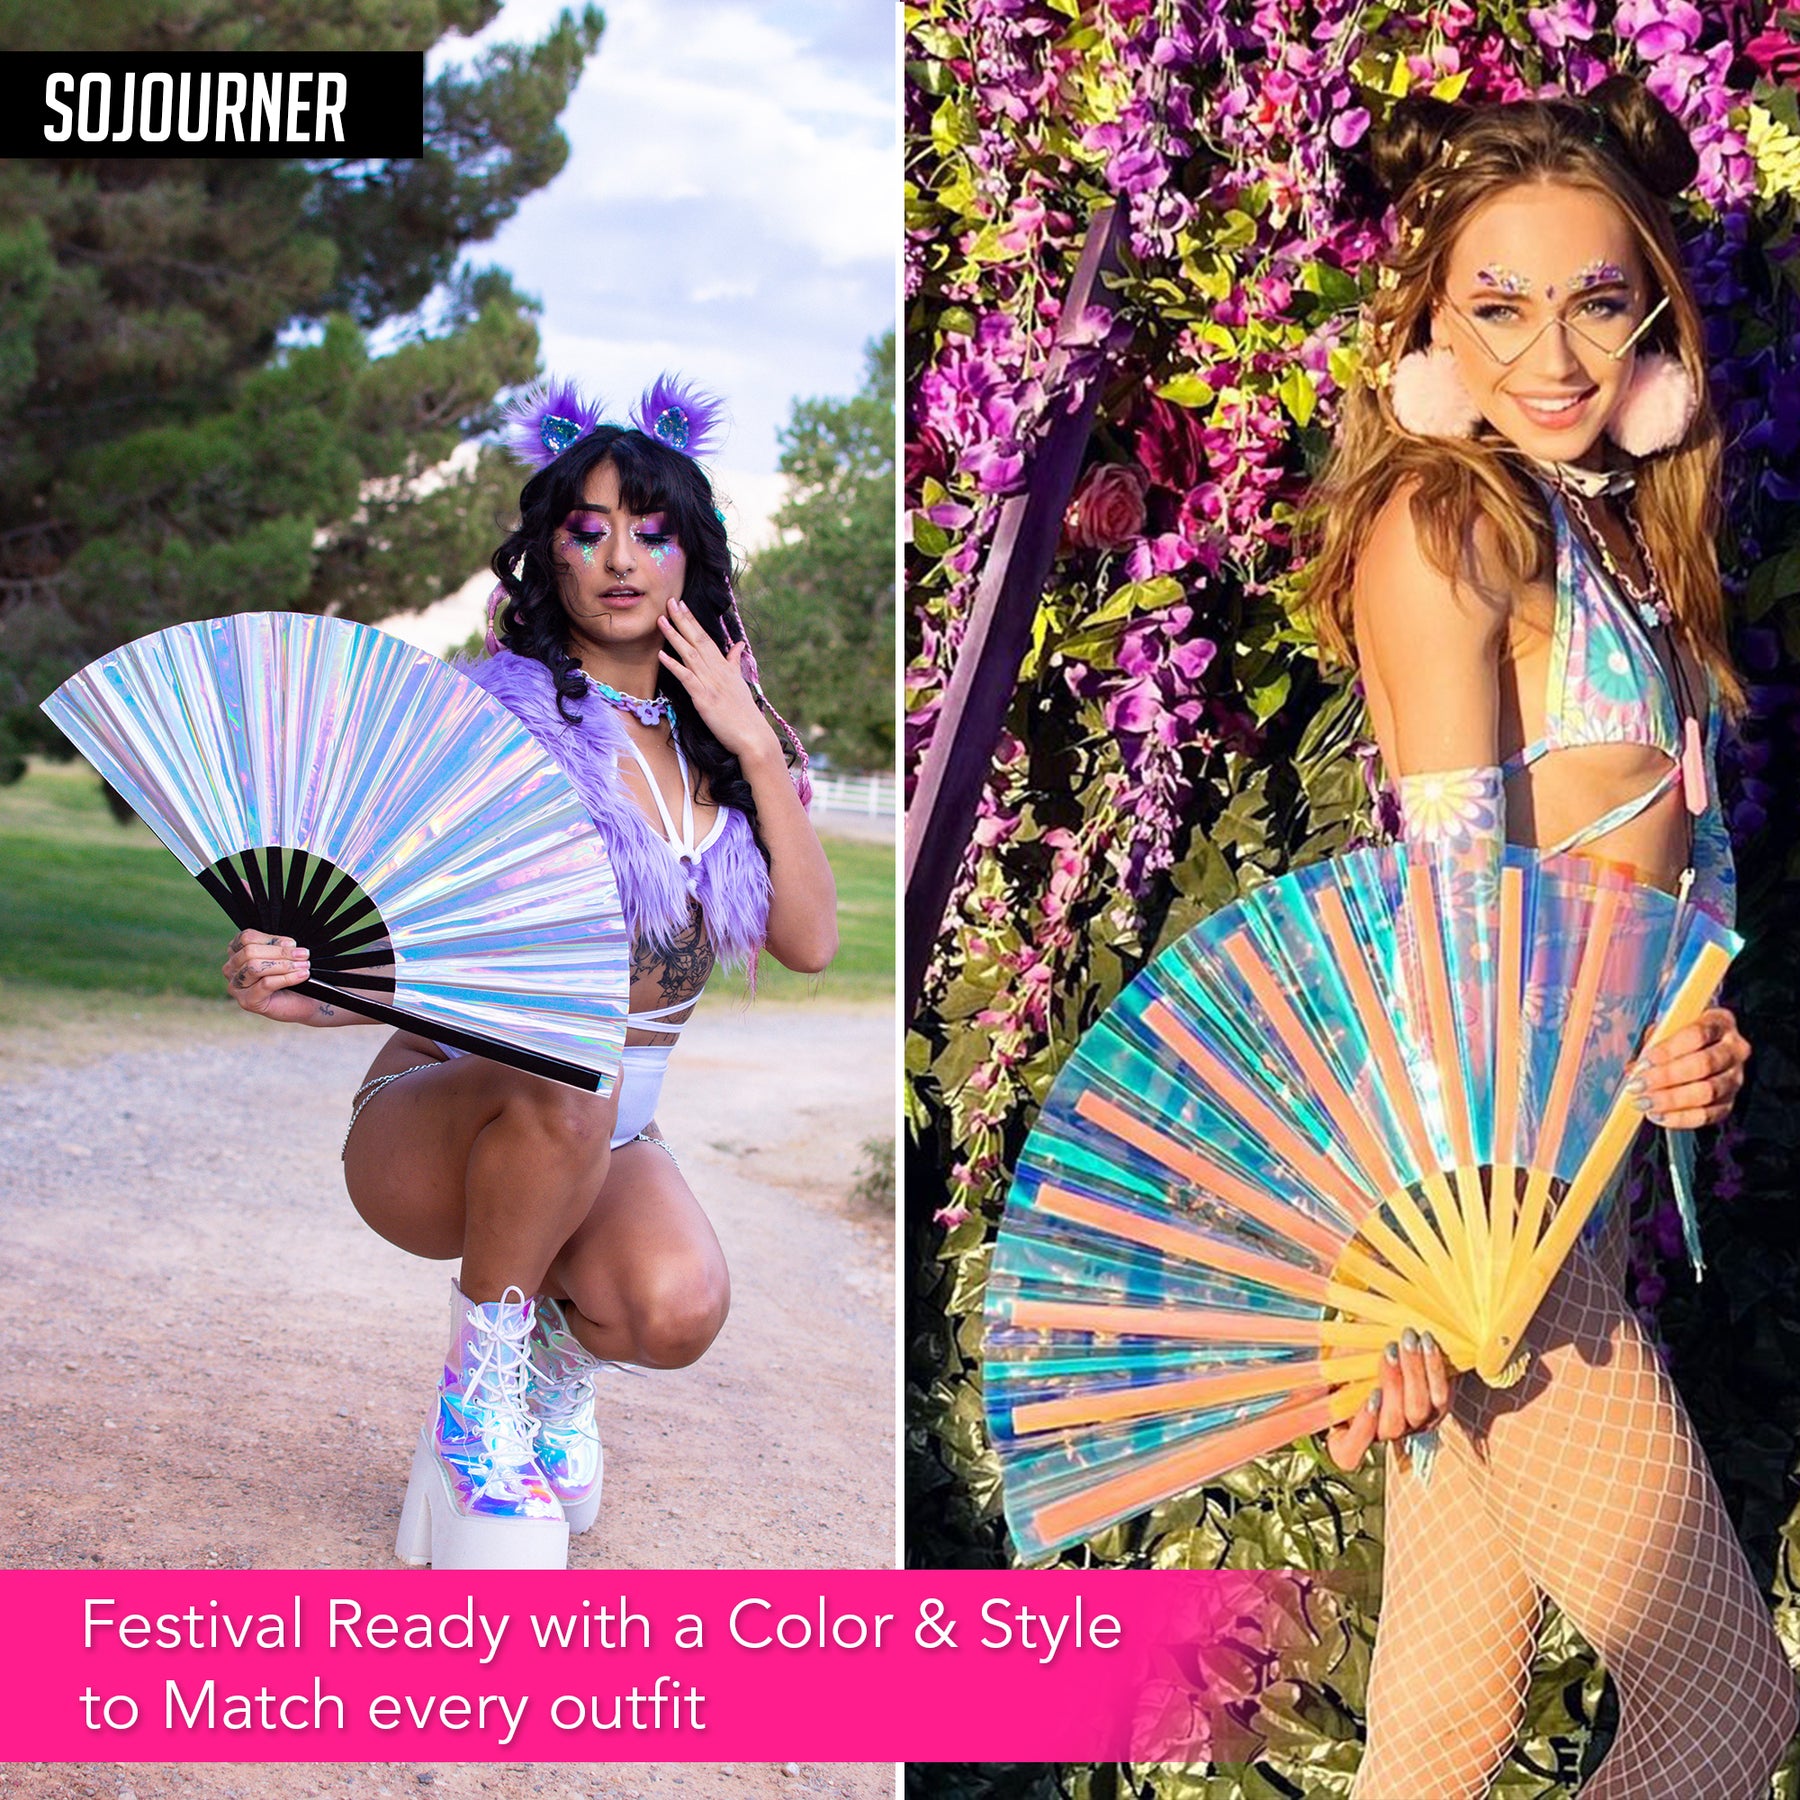 Holographic Rave Fan - Pride Fan and Festival Fan - Large Folding Fan for Festivals (Holographic Teal)